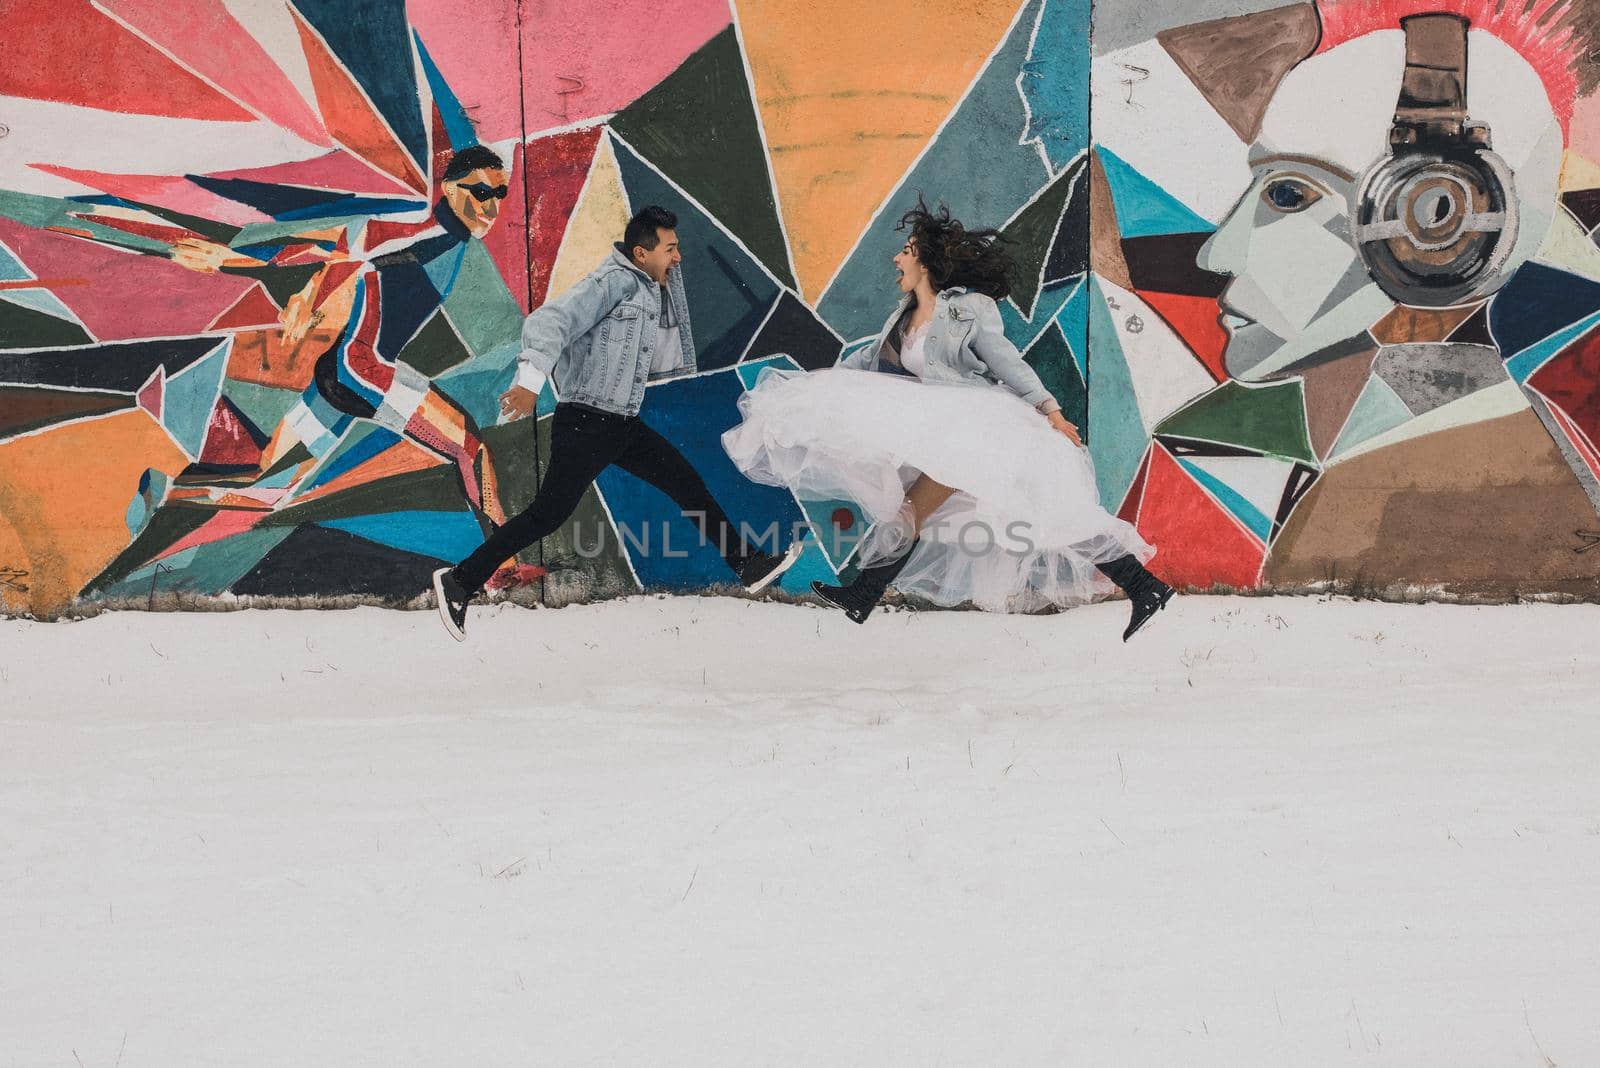 Khmelnytskyi, Ukraine - 27.11.2018: newlyweds in wedding clothes and denim jackets jumping against wall pop art street in winter by AndriiDrachuk